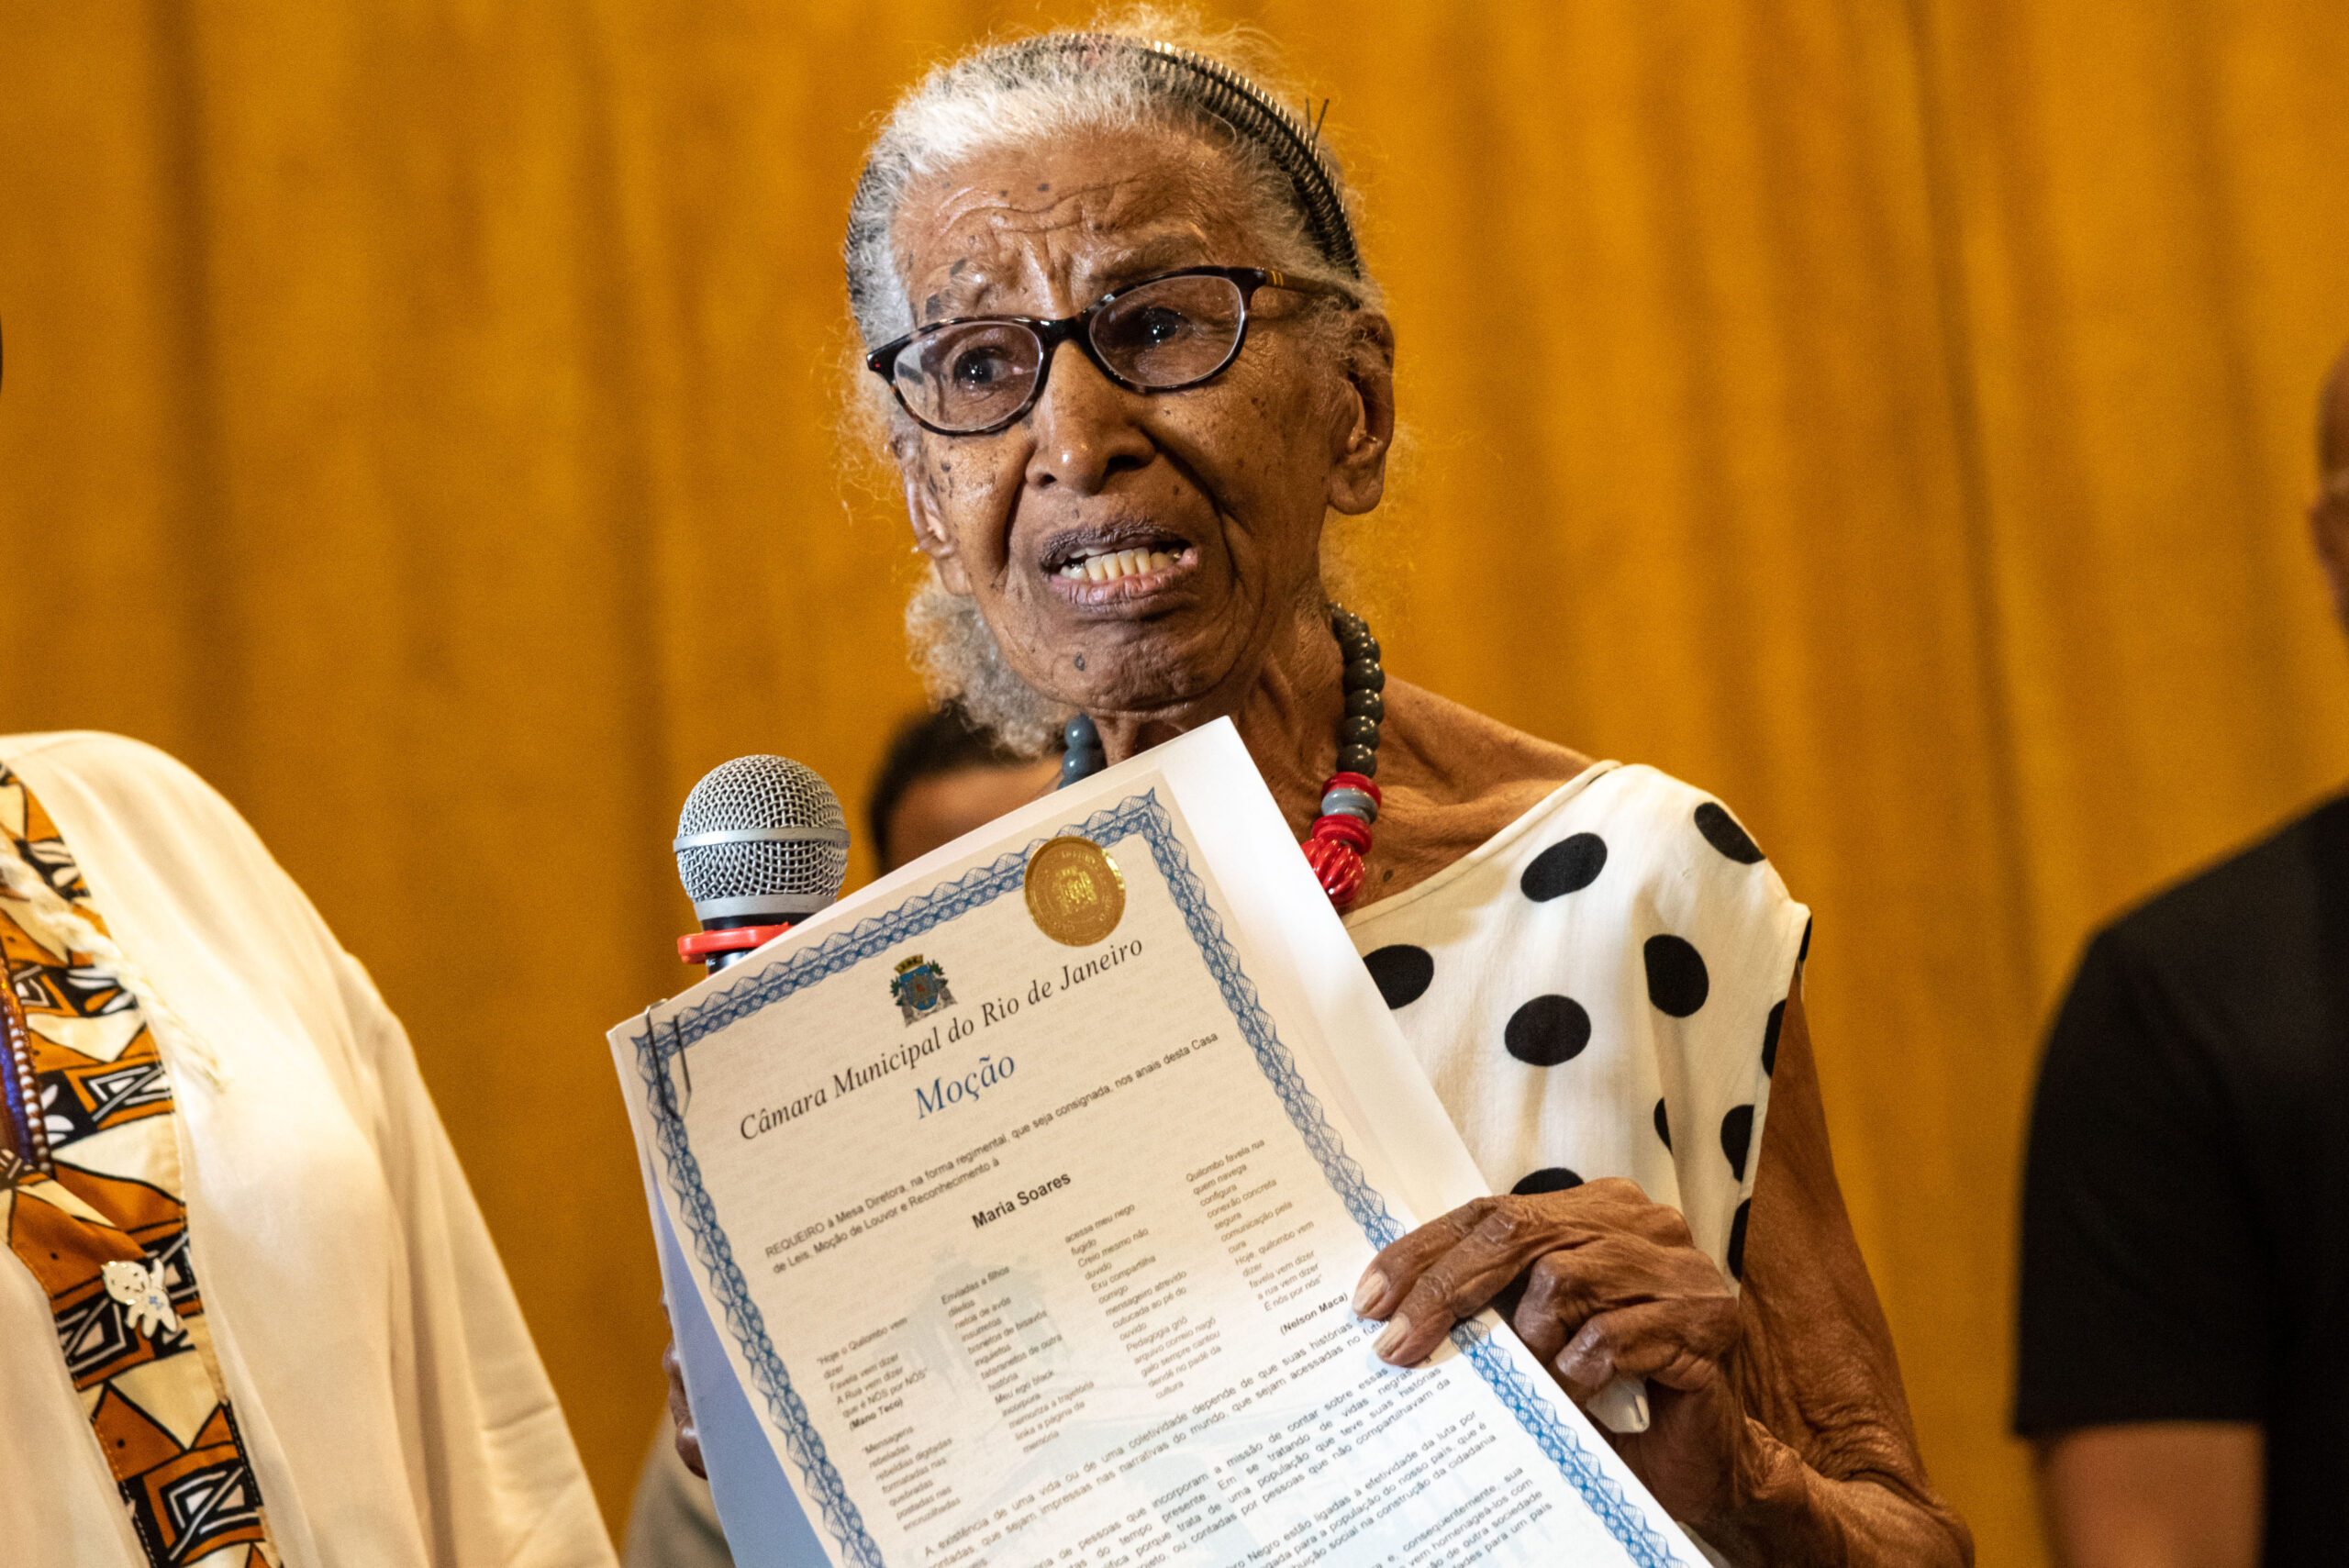 At 99 years old, Dona Santinha was honored with a Motion of Praise and Recognition for her remarkable life journey and activism. Photo by Bárbara Dias.